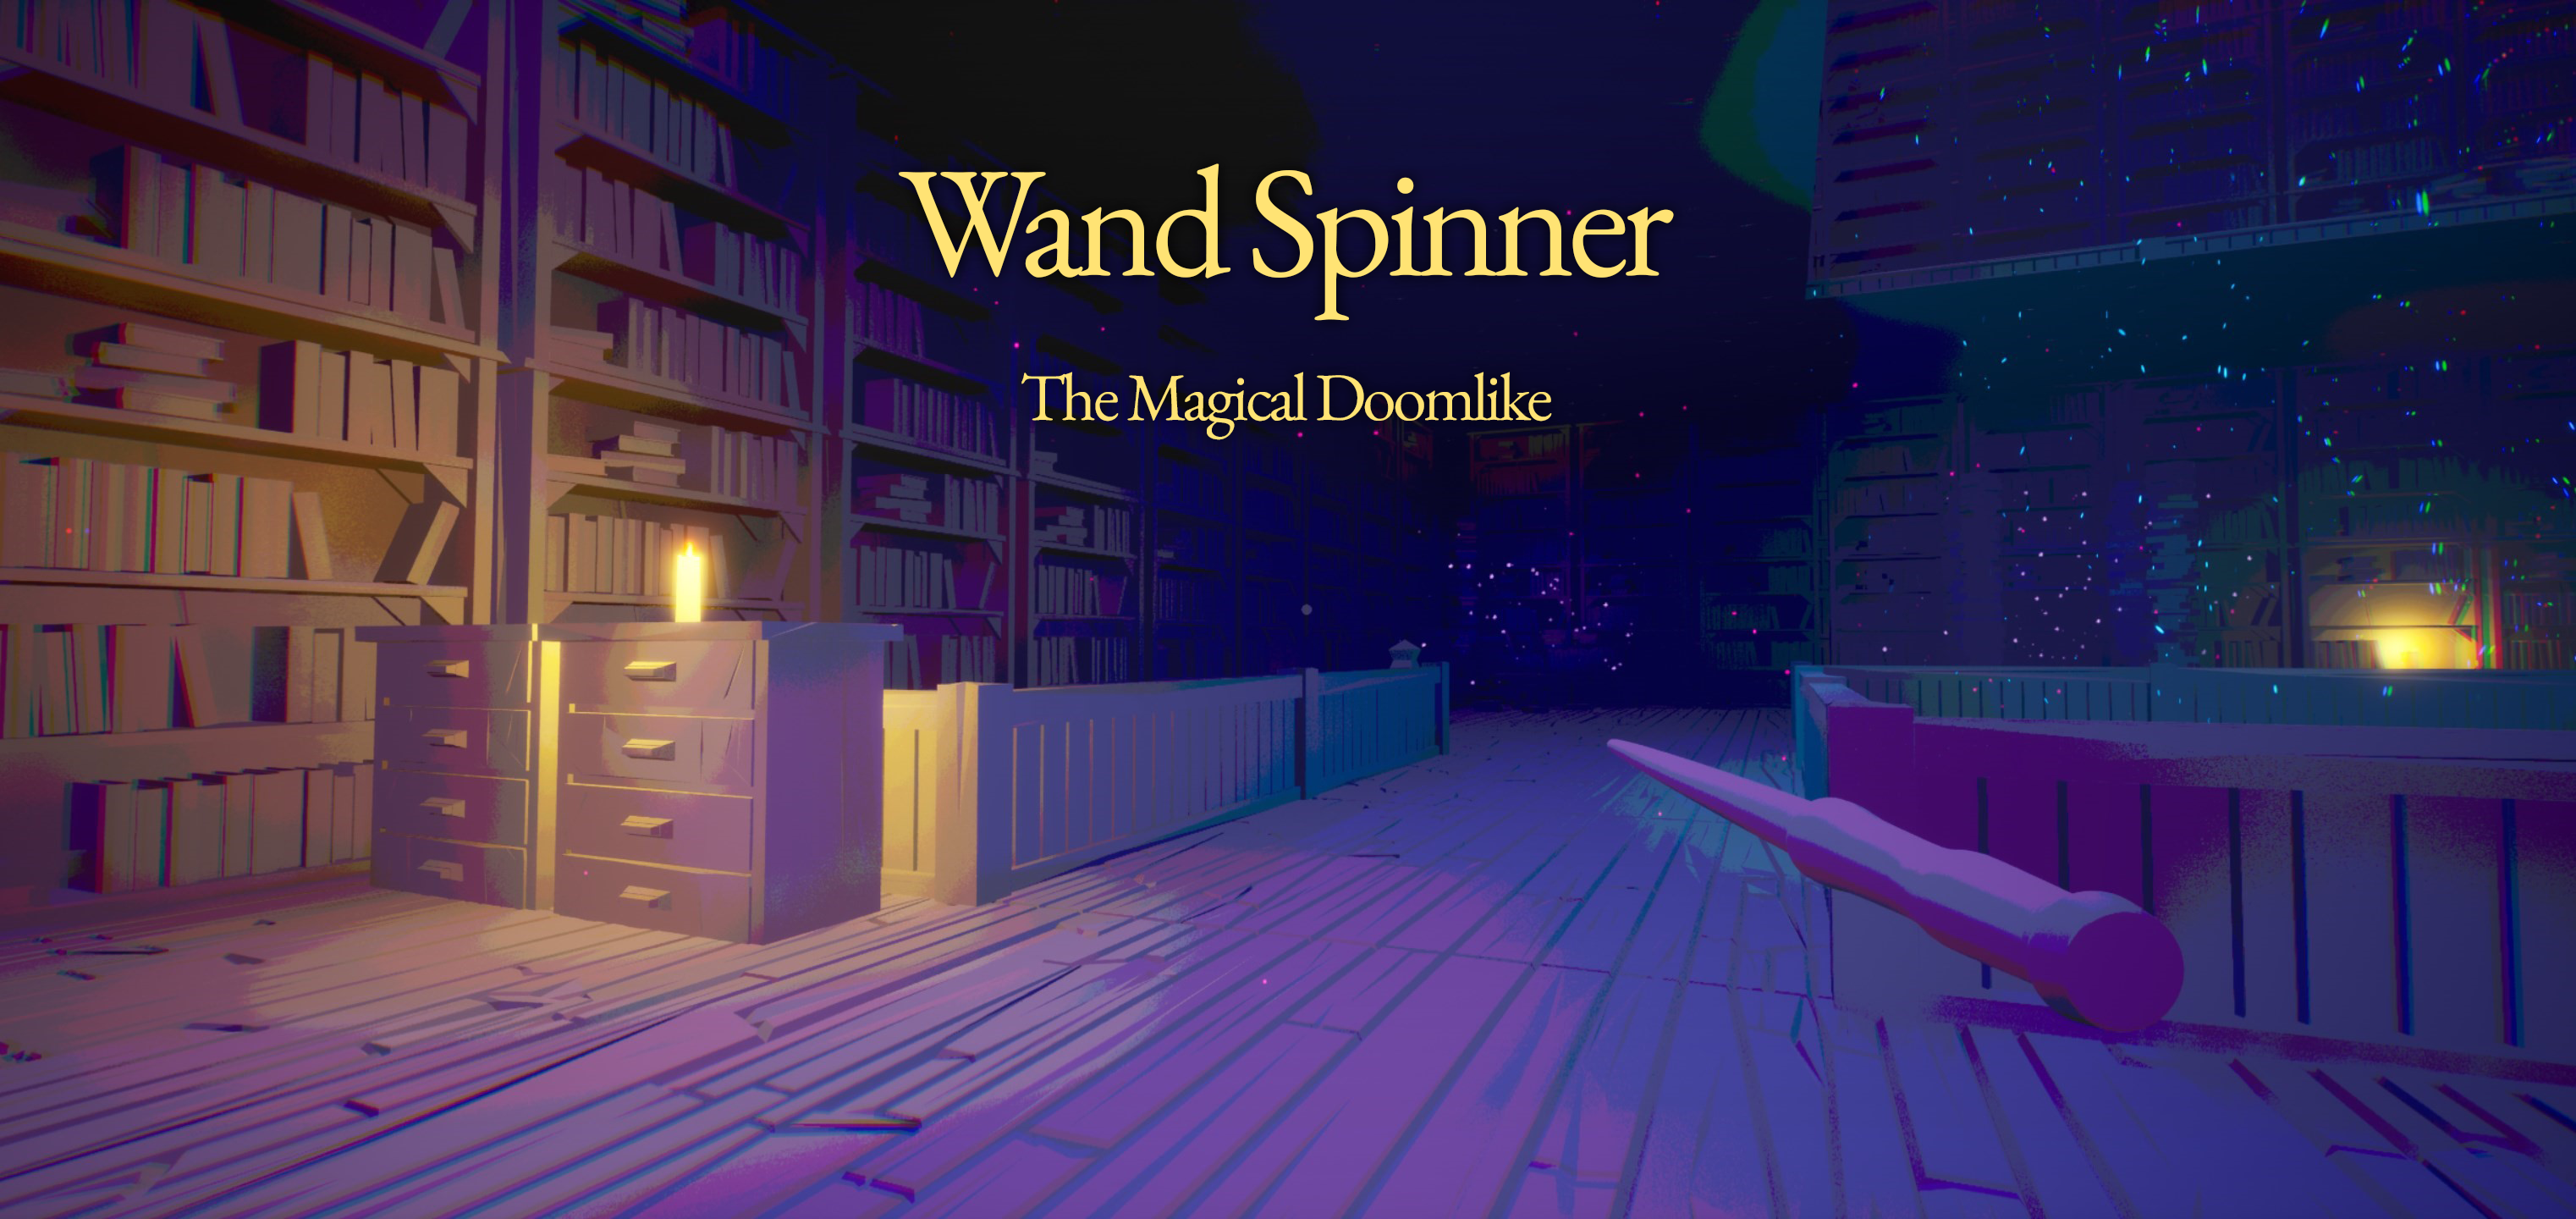 Wand Spinner